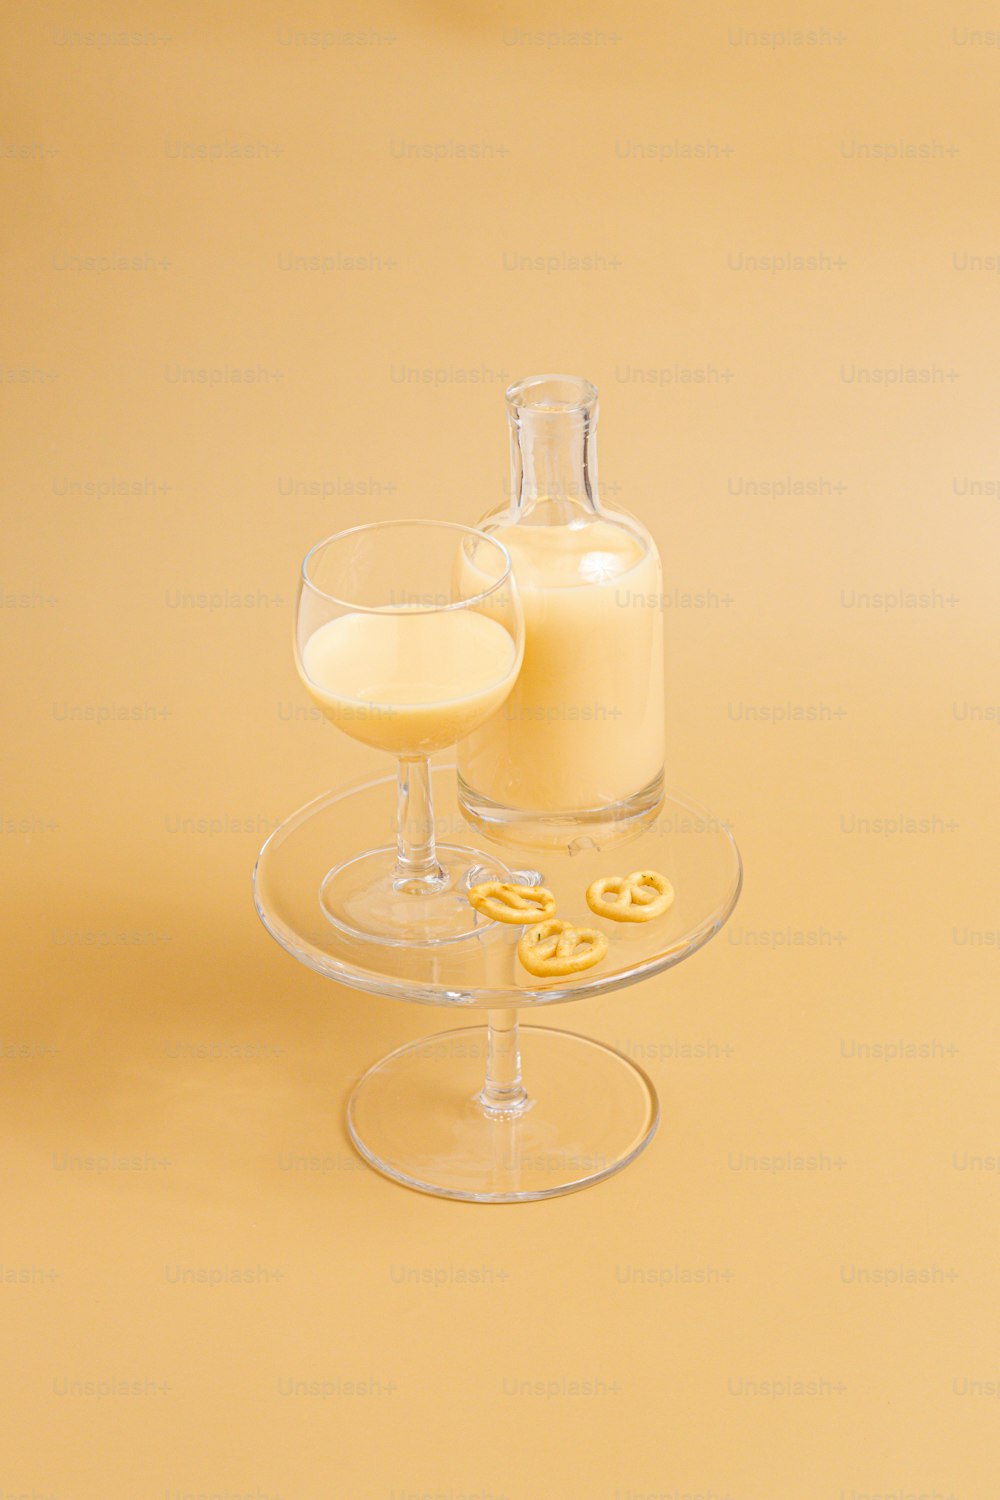 a glass of milk and a bottle of milk on a yellow background